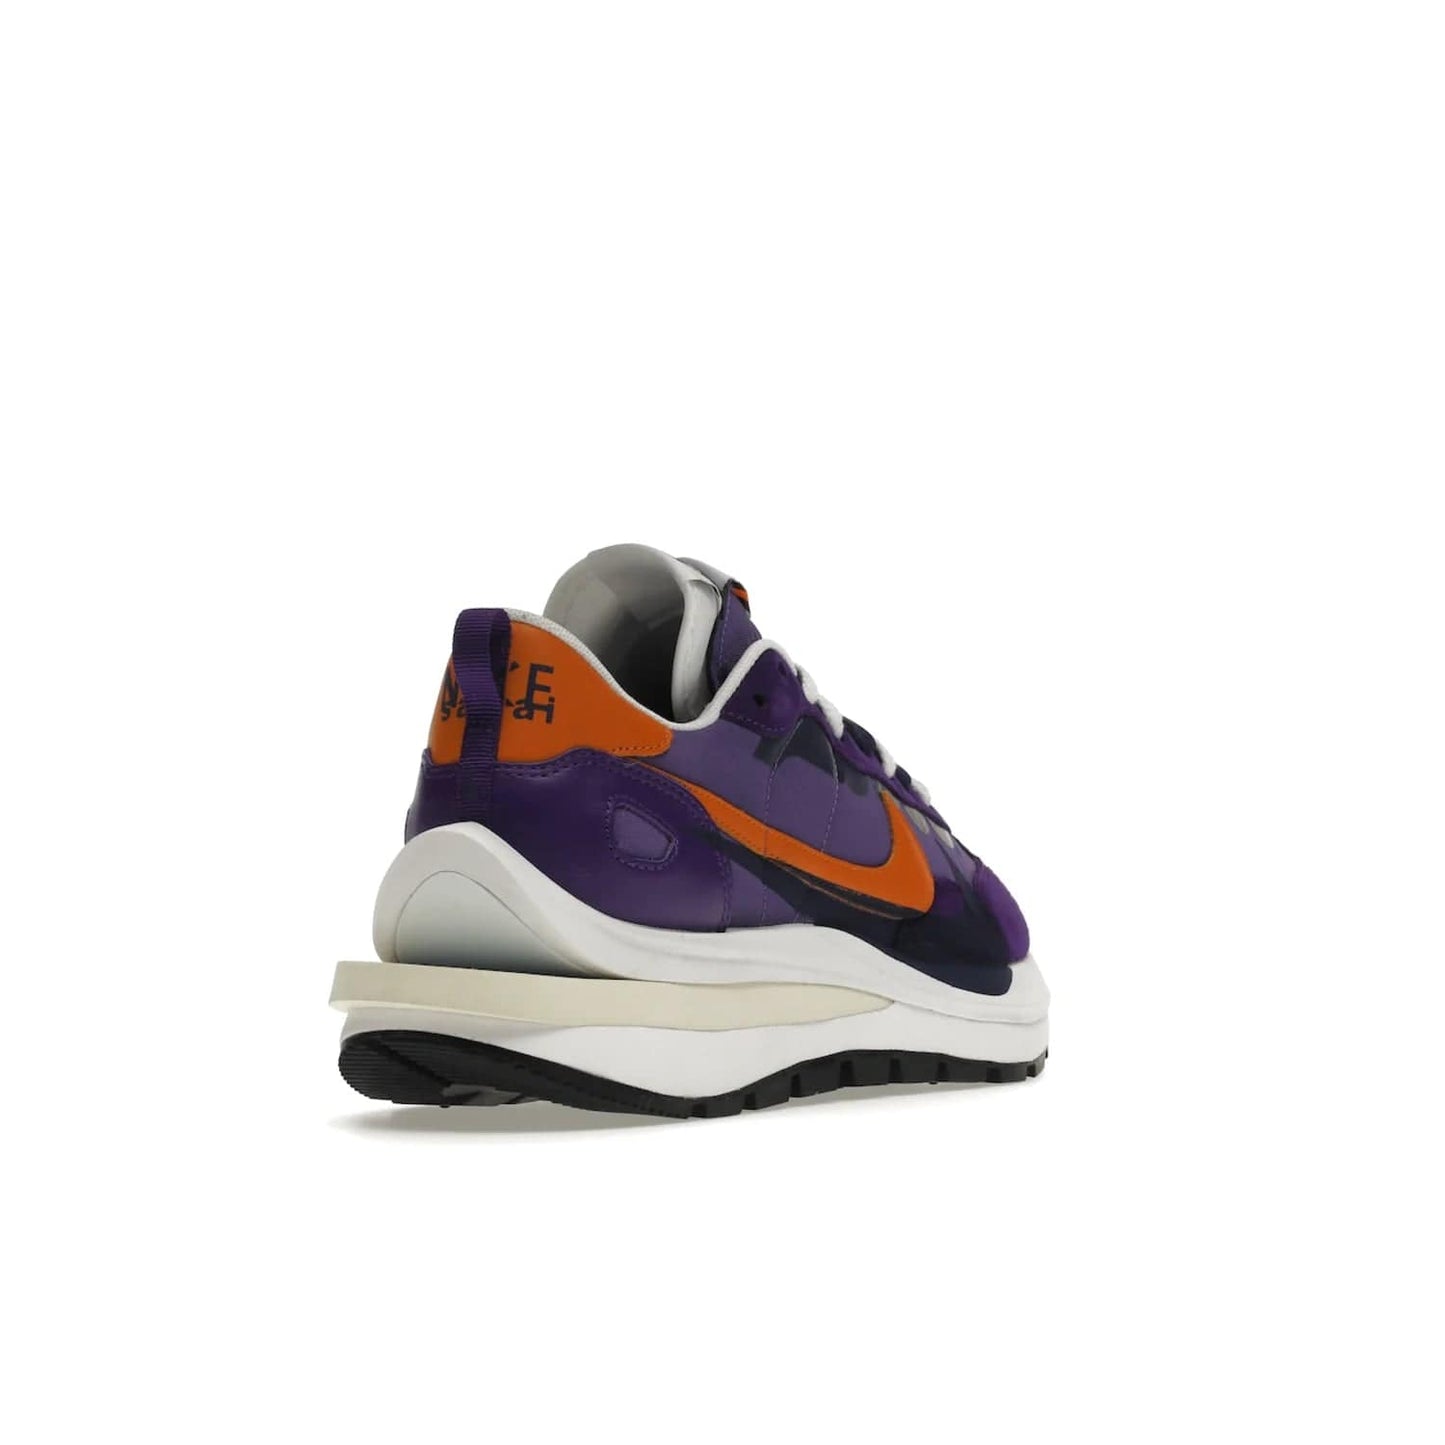 Nike Vaporwaffle sacai Dark Iris - Image 31 - Only at www.BallersClubKickz.com - Unique Nike Vaporwaffle sacai Dark Iris collab. Suede, leather & textile upper with Orange accents. Dual tongues & midsoles. Woven labels & heel tabs branding. Colorway of Purple, Orange, White & Black. Must-have for any wardrobe.